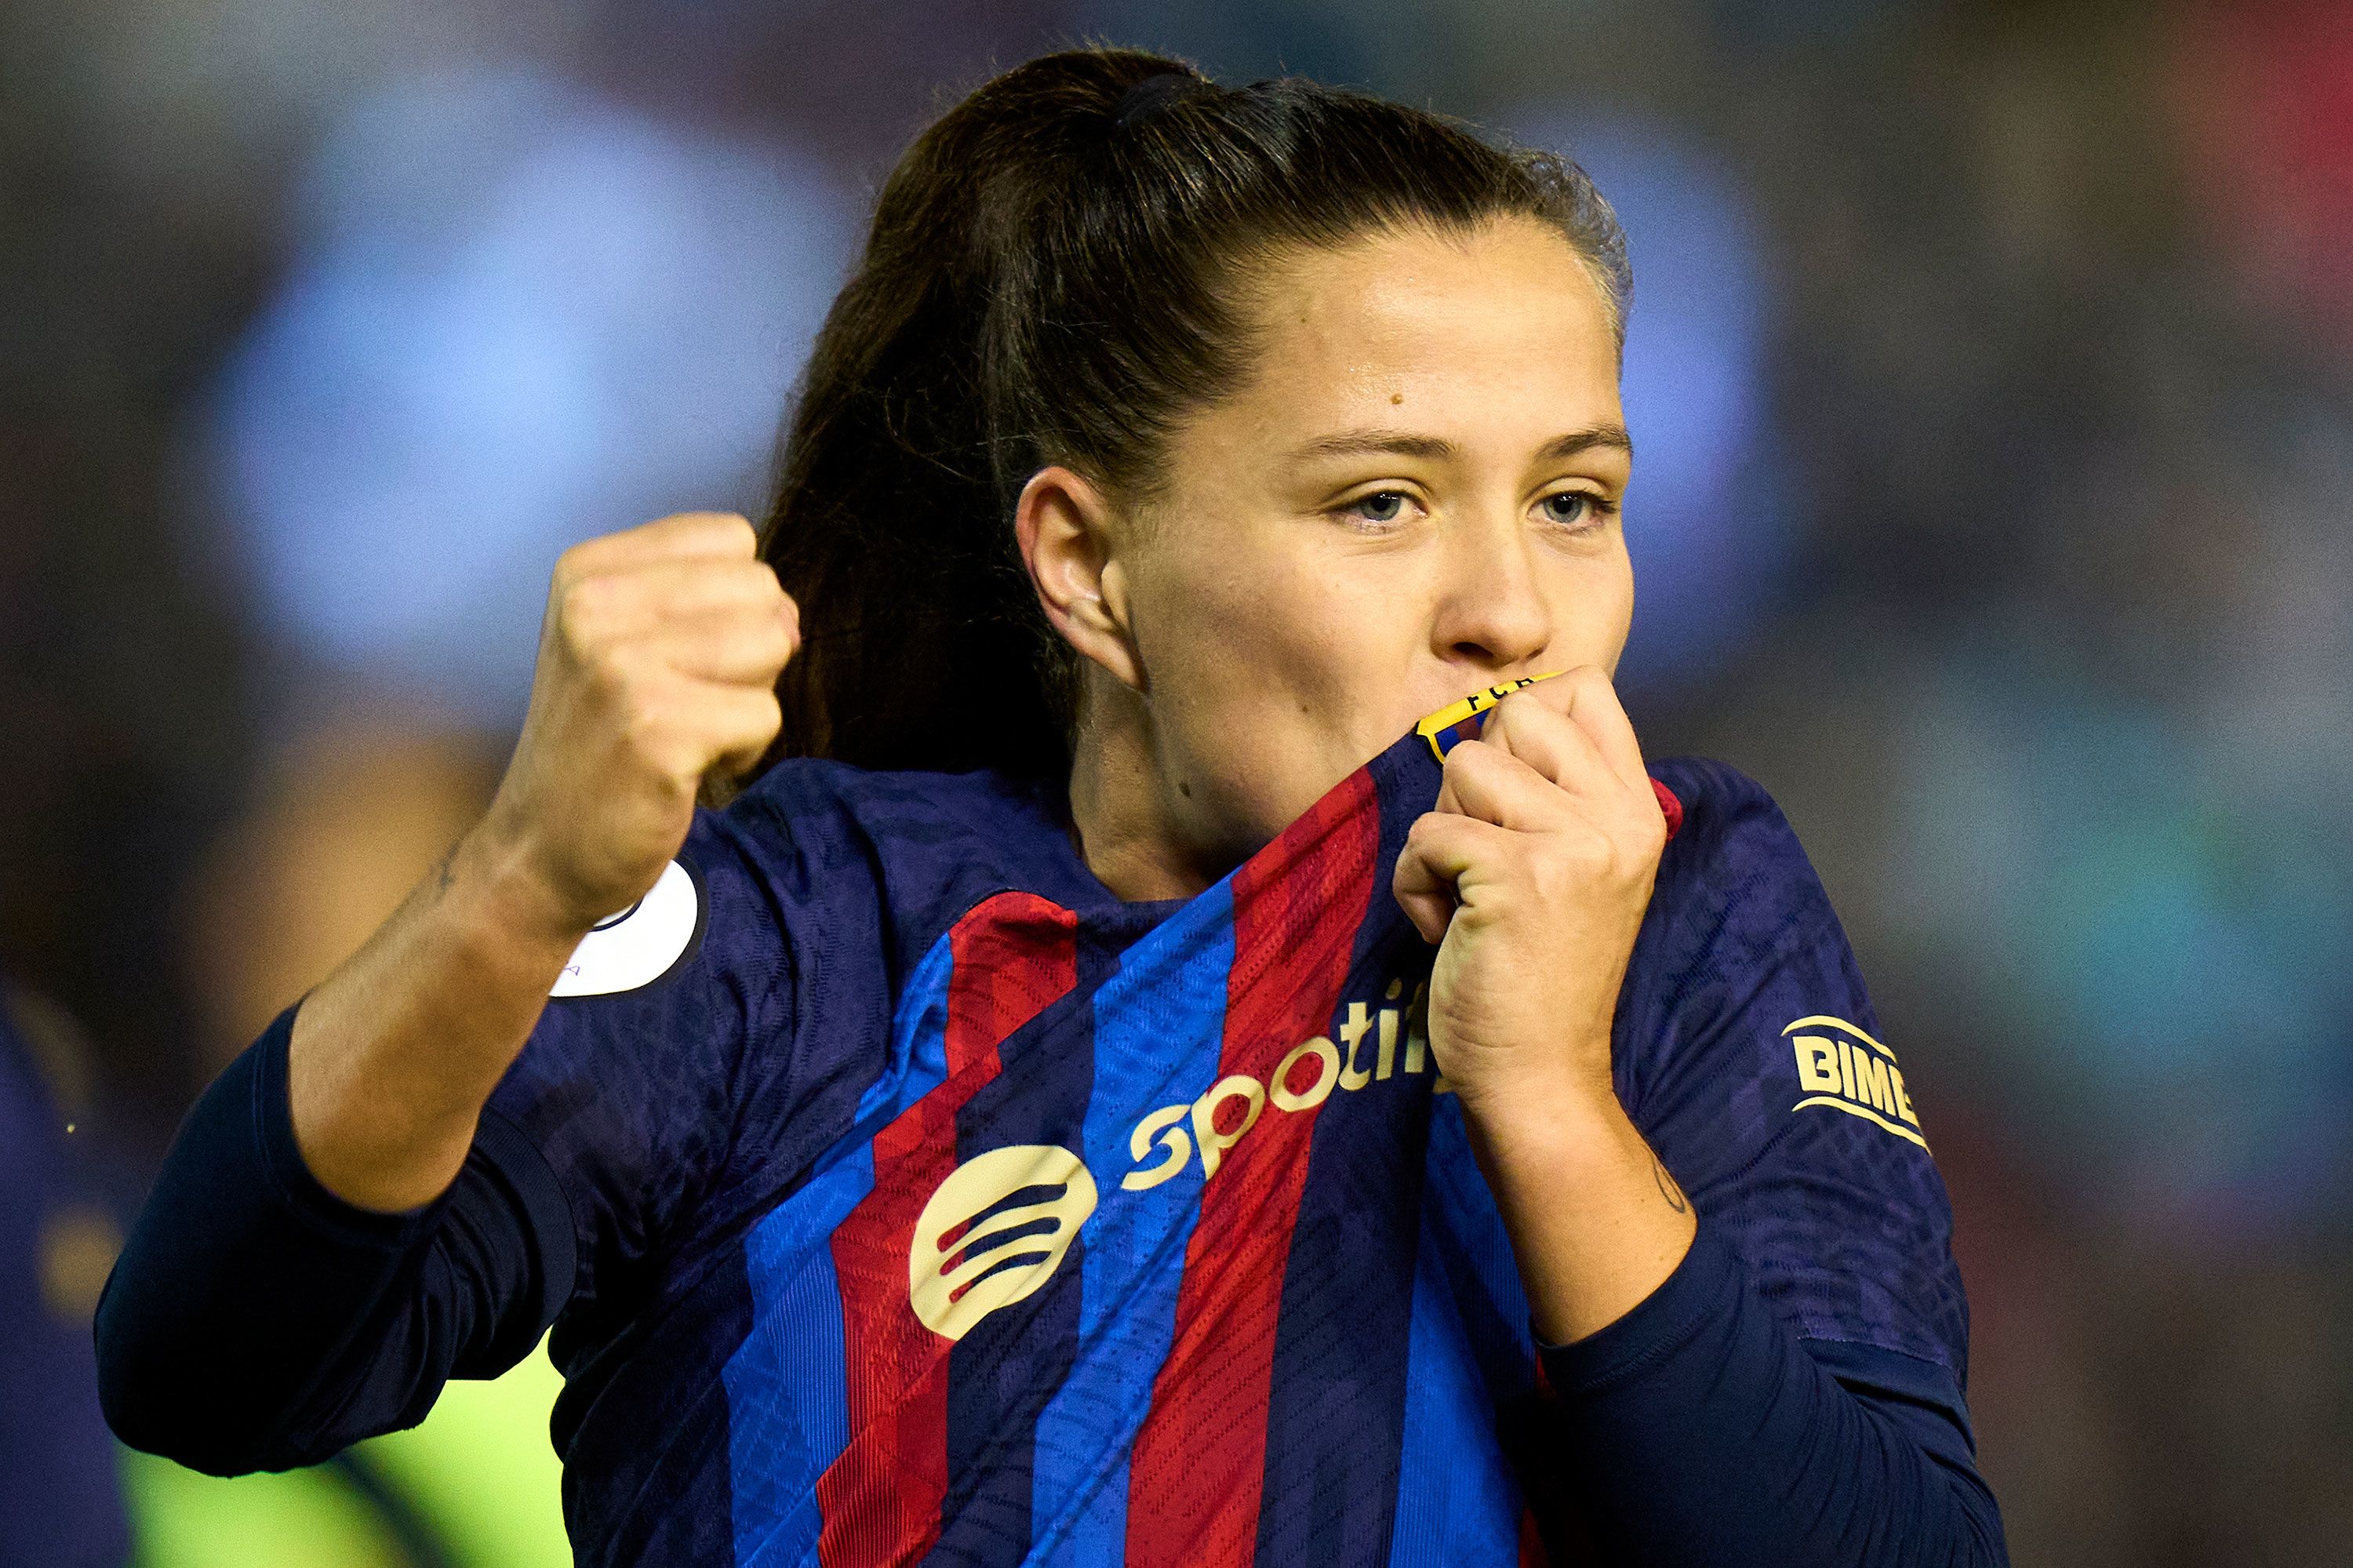 Barcelona Femení become first team to win 50 consecutive league games